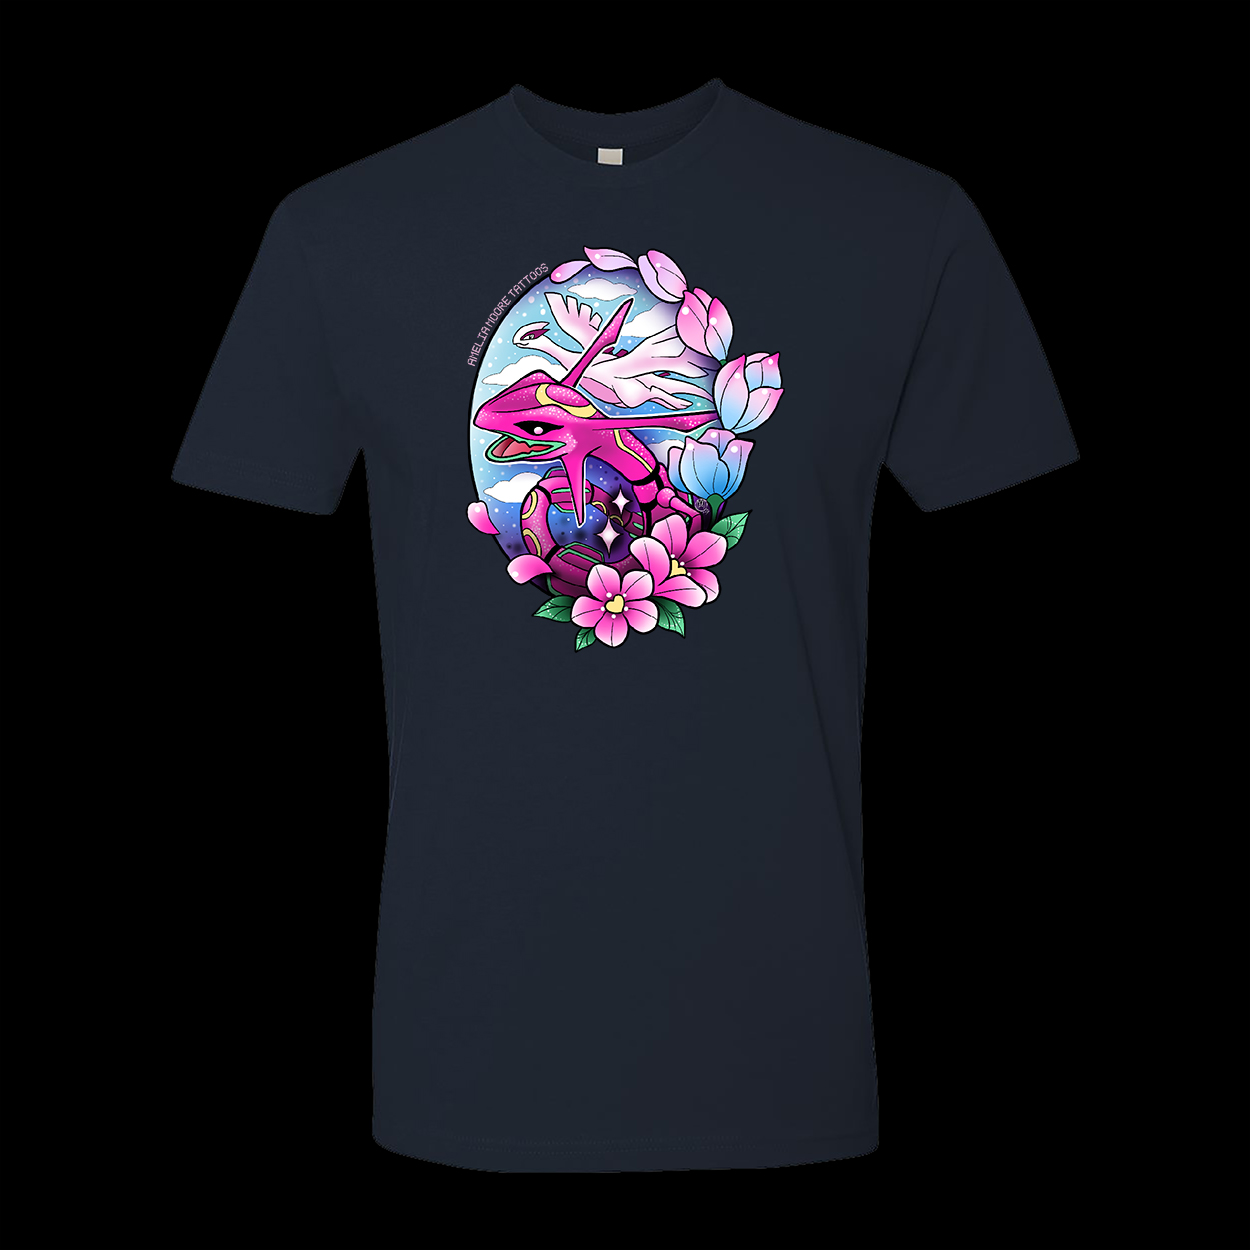 Amelia Moore rayquaza t-shirt Navy color